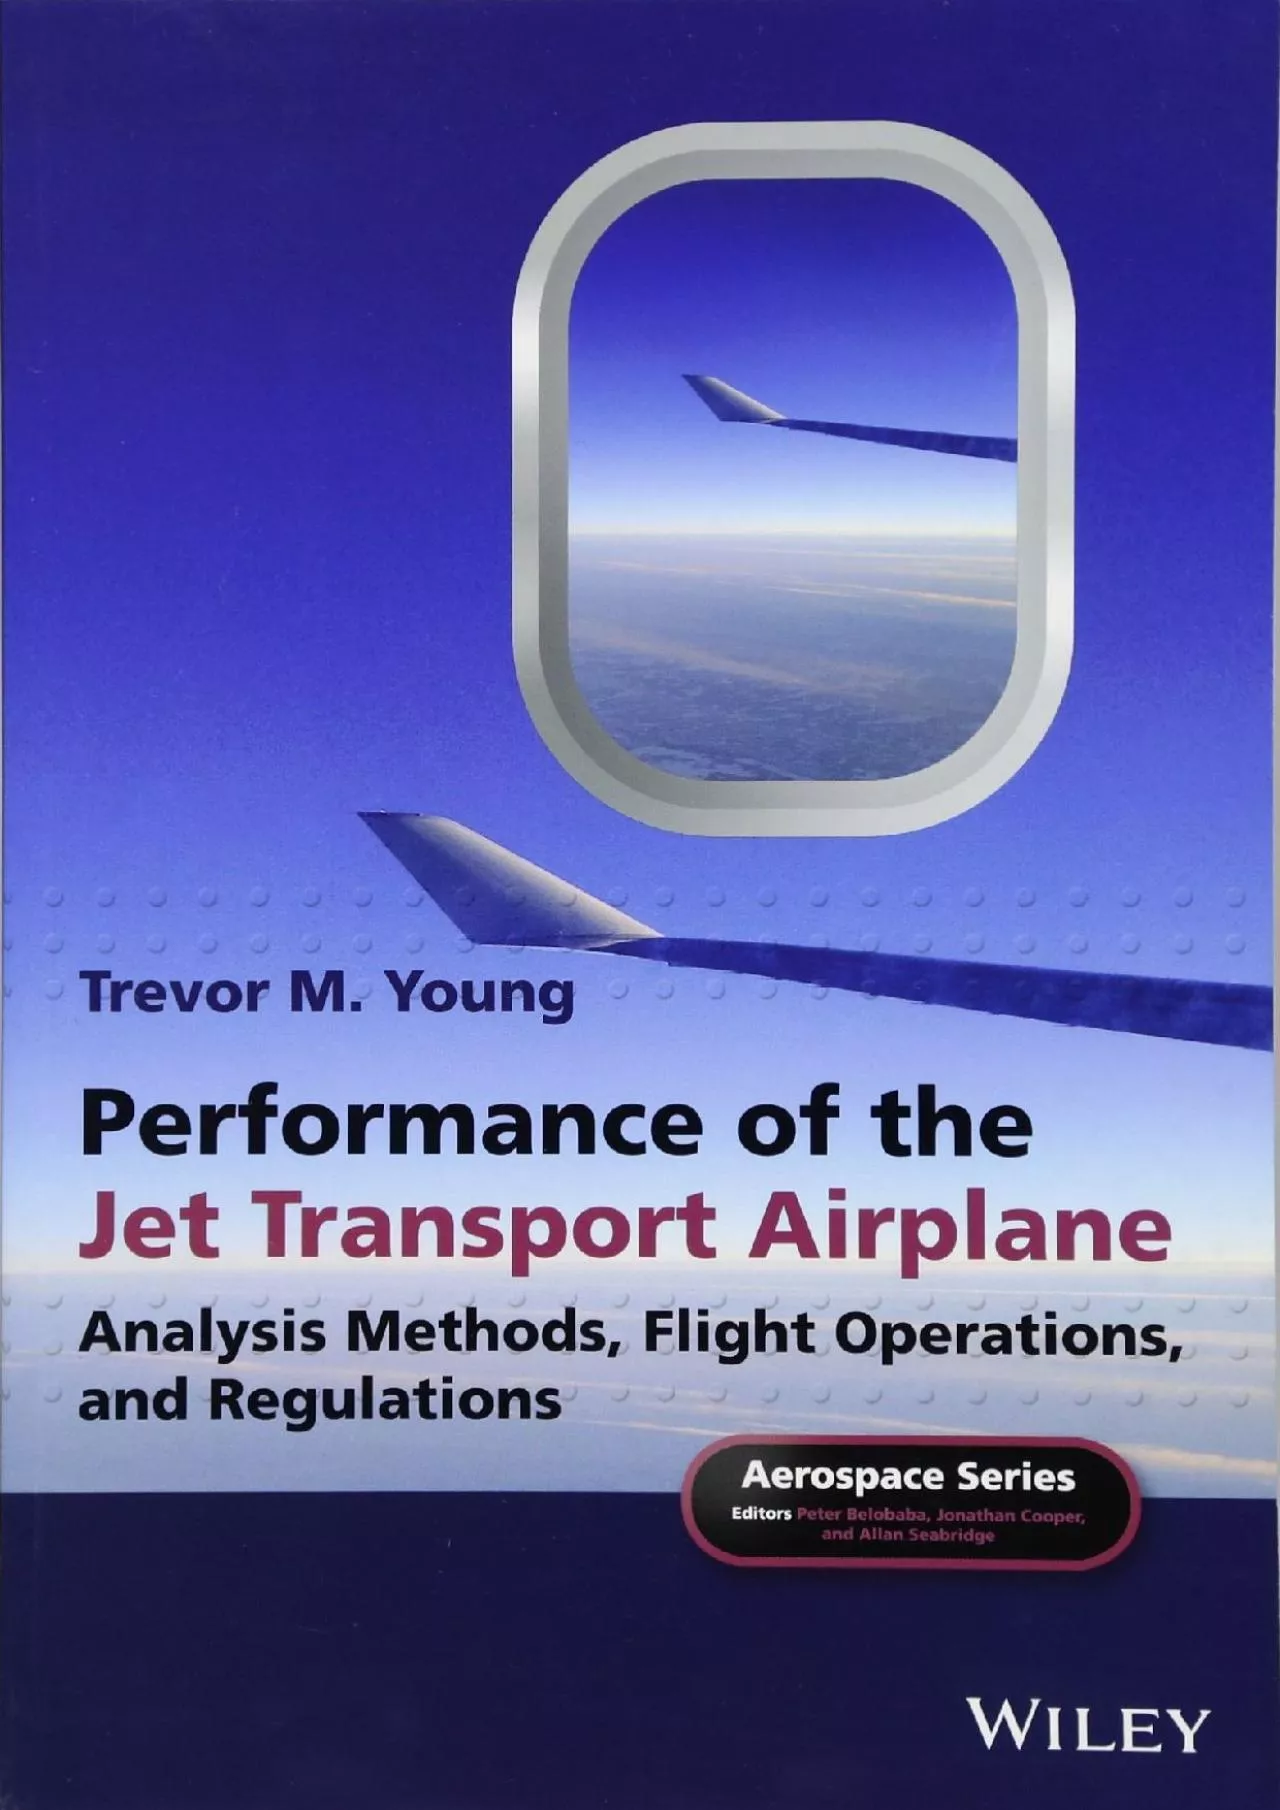 (BOOK)-Performance of the Jet Transport Airplane: Analysis Methods, Flight Operations,